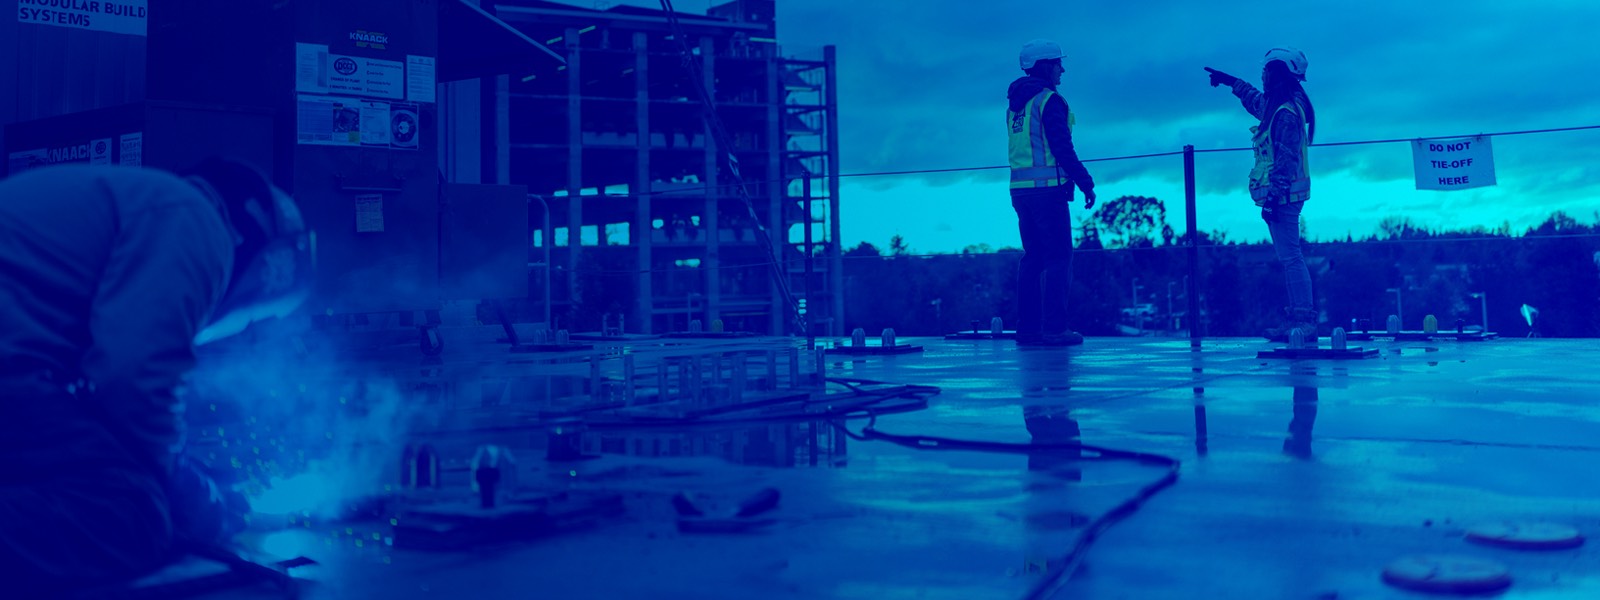 construction site with blue overlay